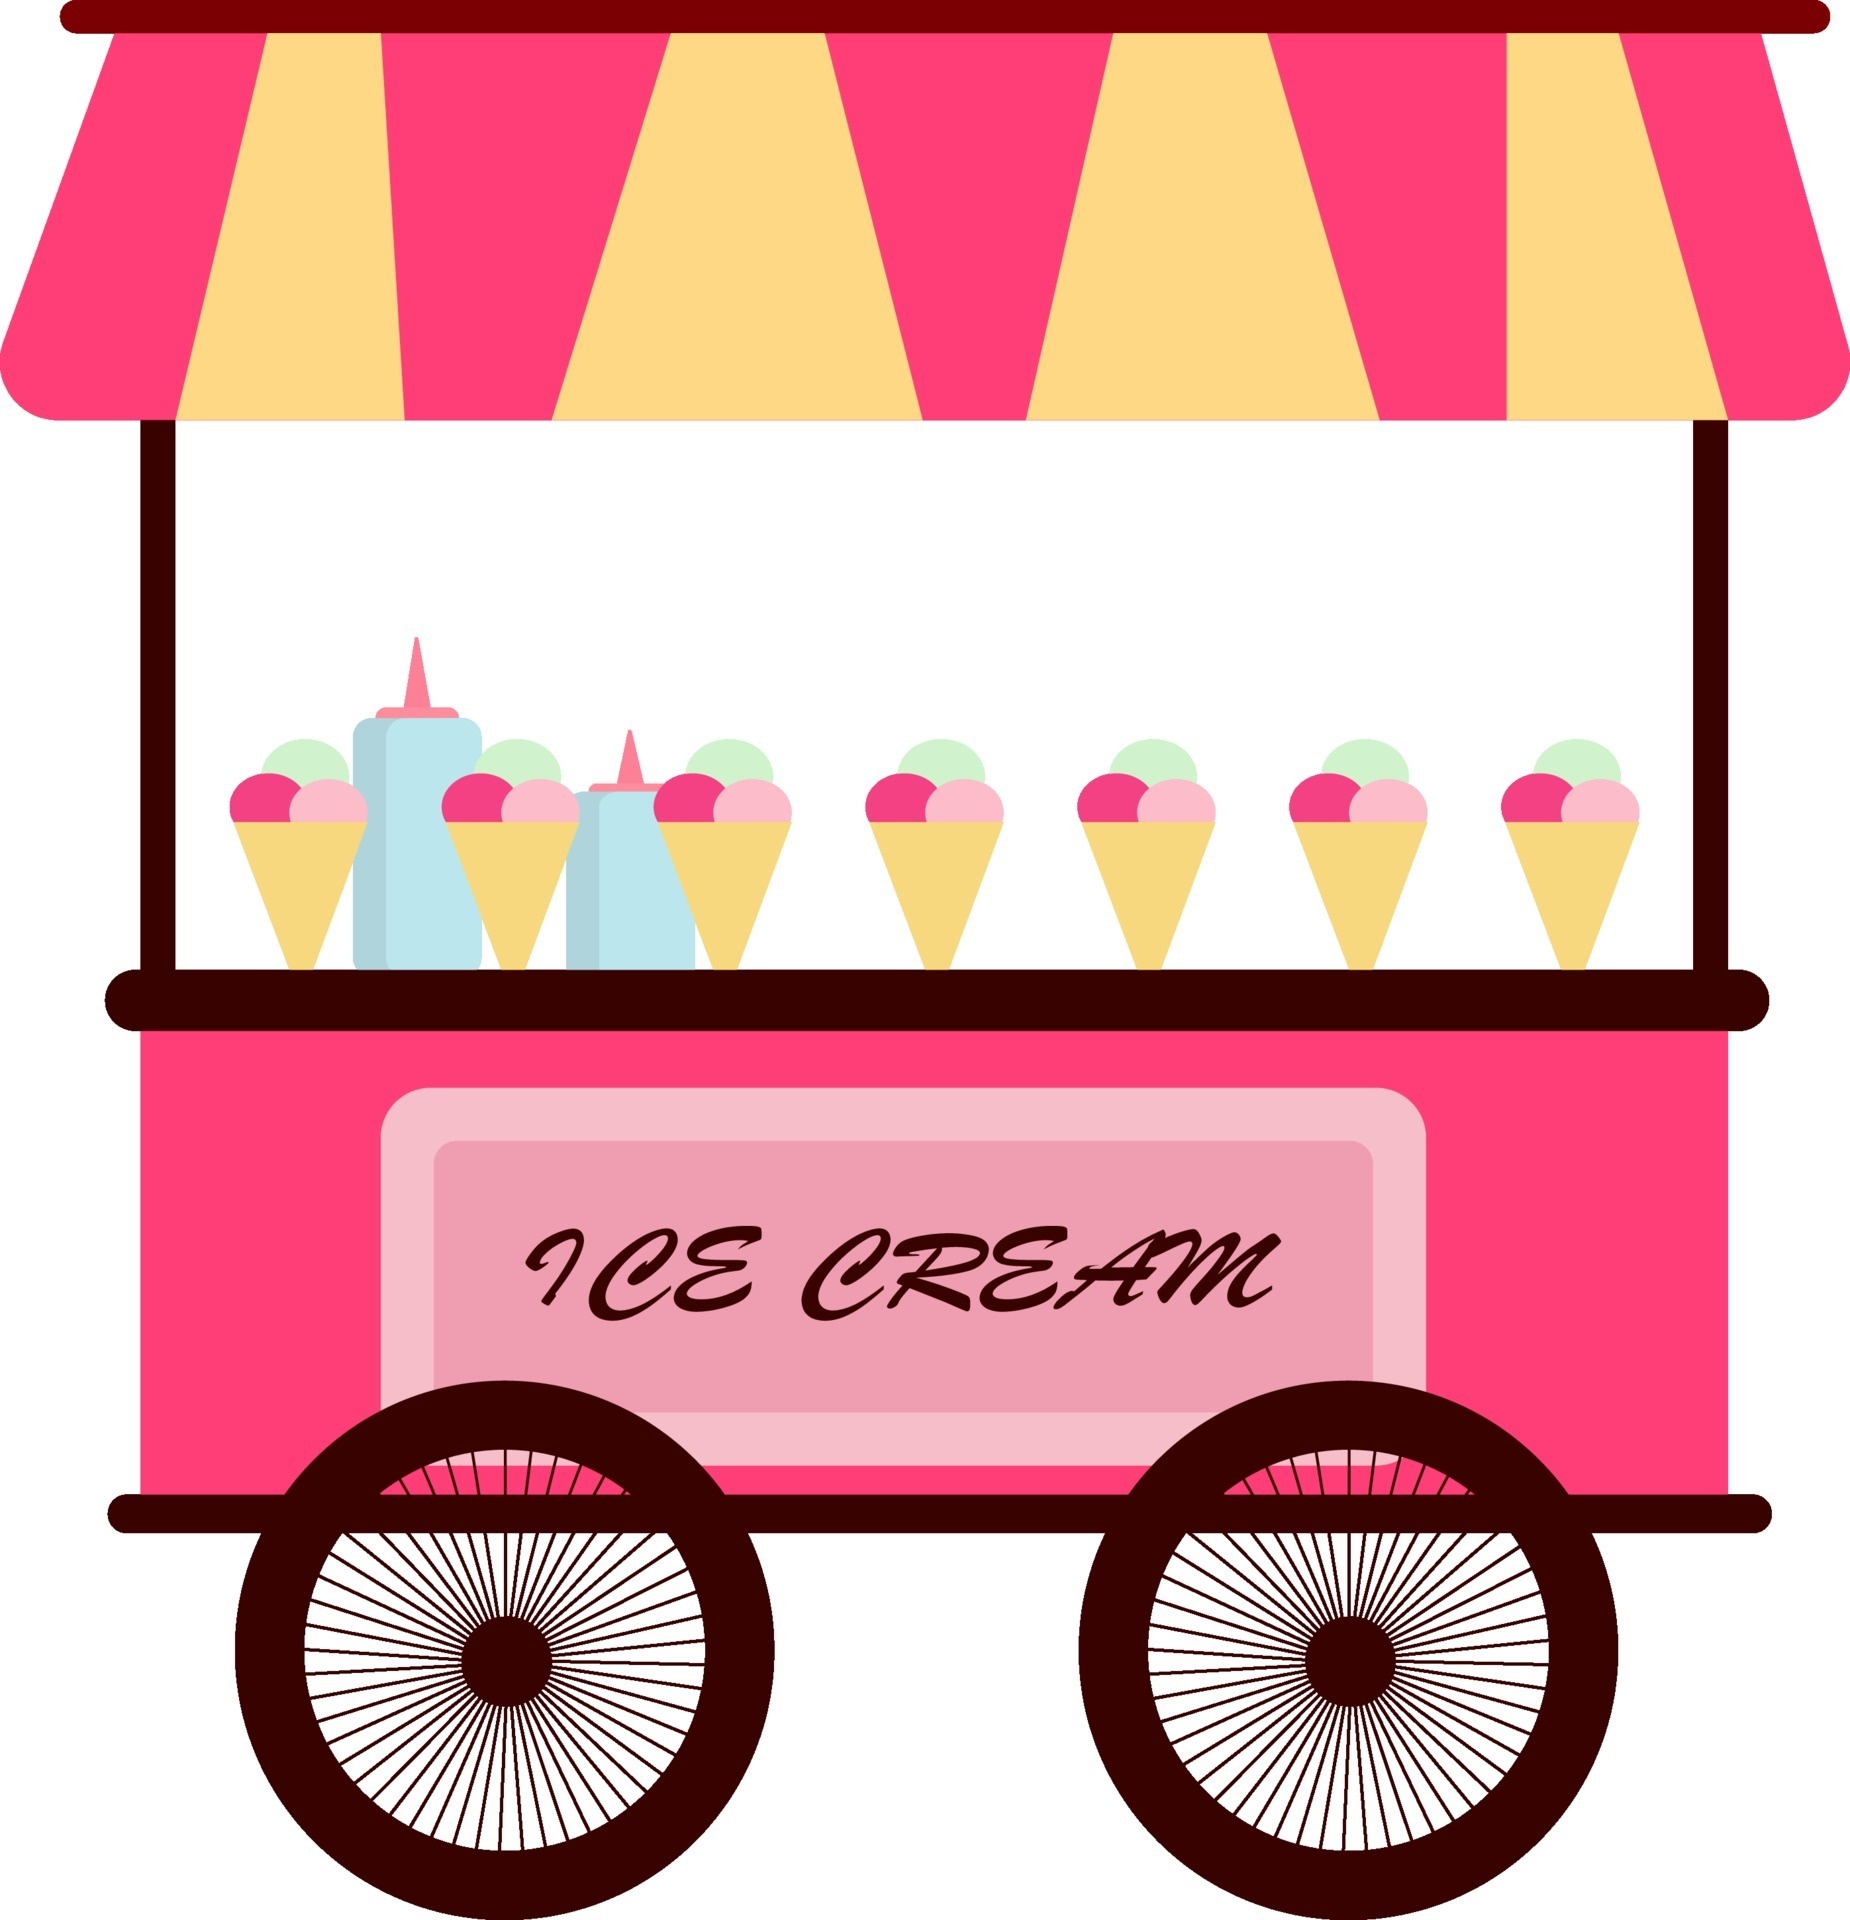 https://static.vecteezy.com/system/resources/previews/012/271/461/original/ice-cream-stand-illustration-on-a-white-background-vector.jpg